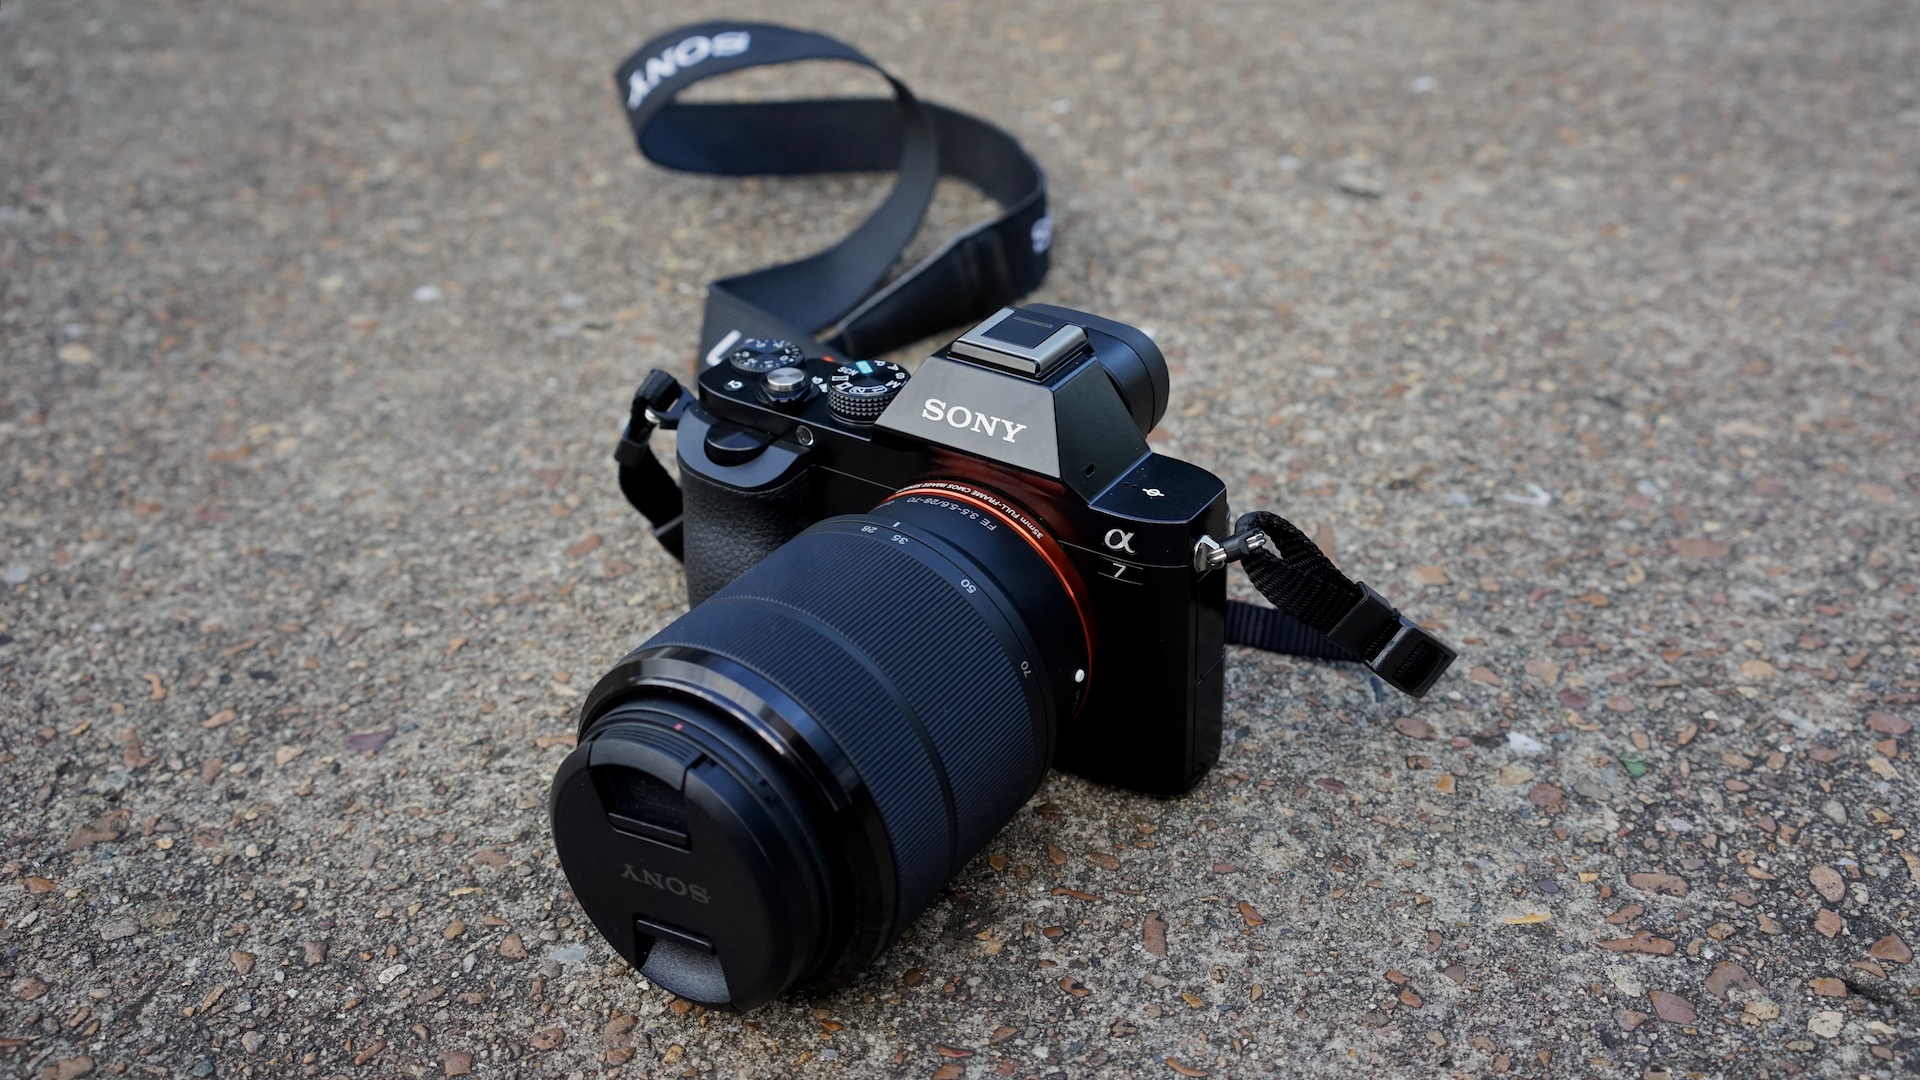 Sony A7r And A7 First Impressions: Full-Frame Power, Palm-Sized Camera